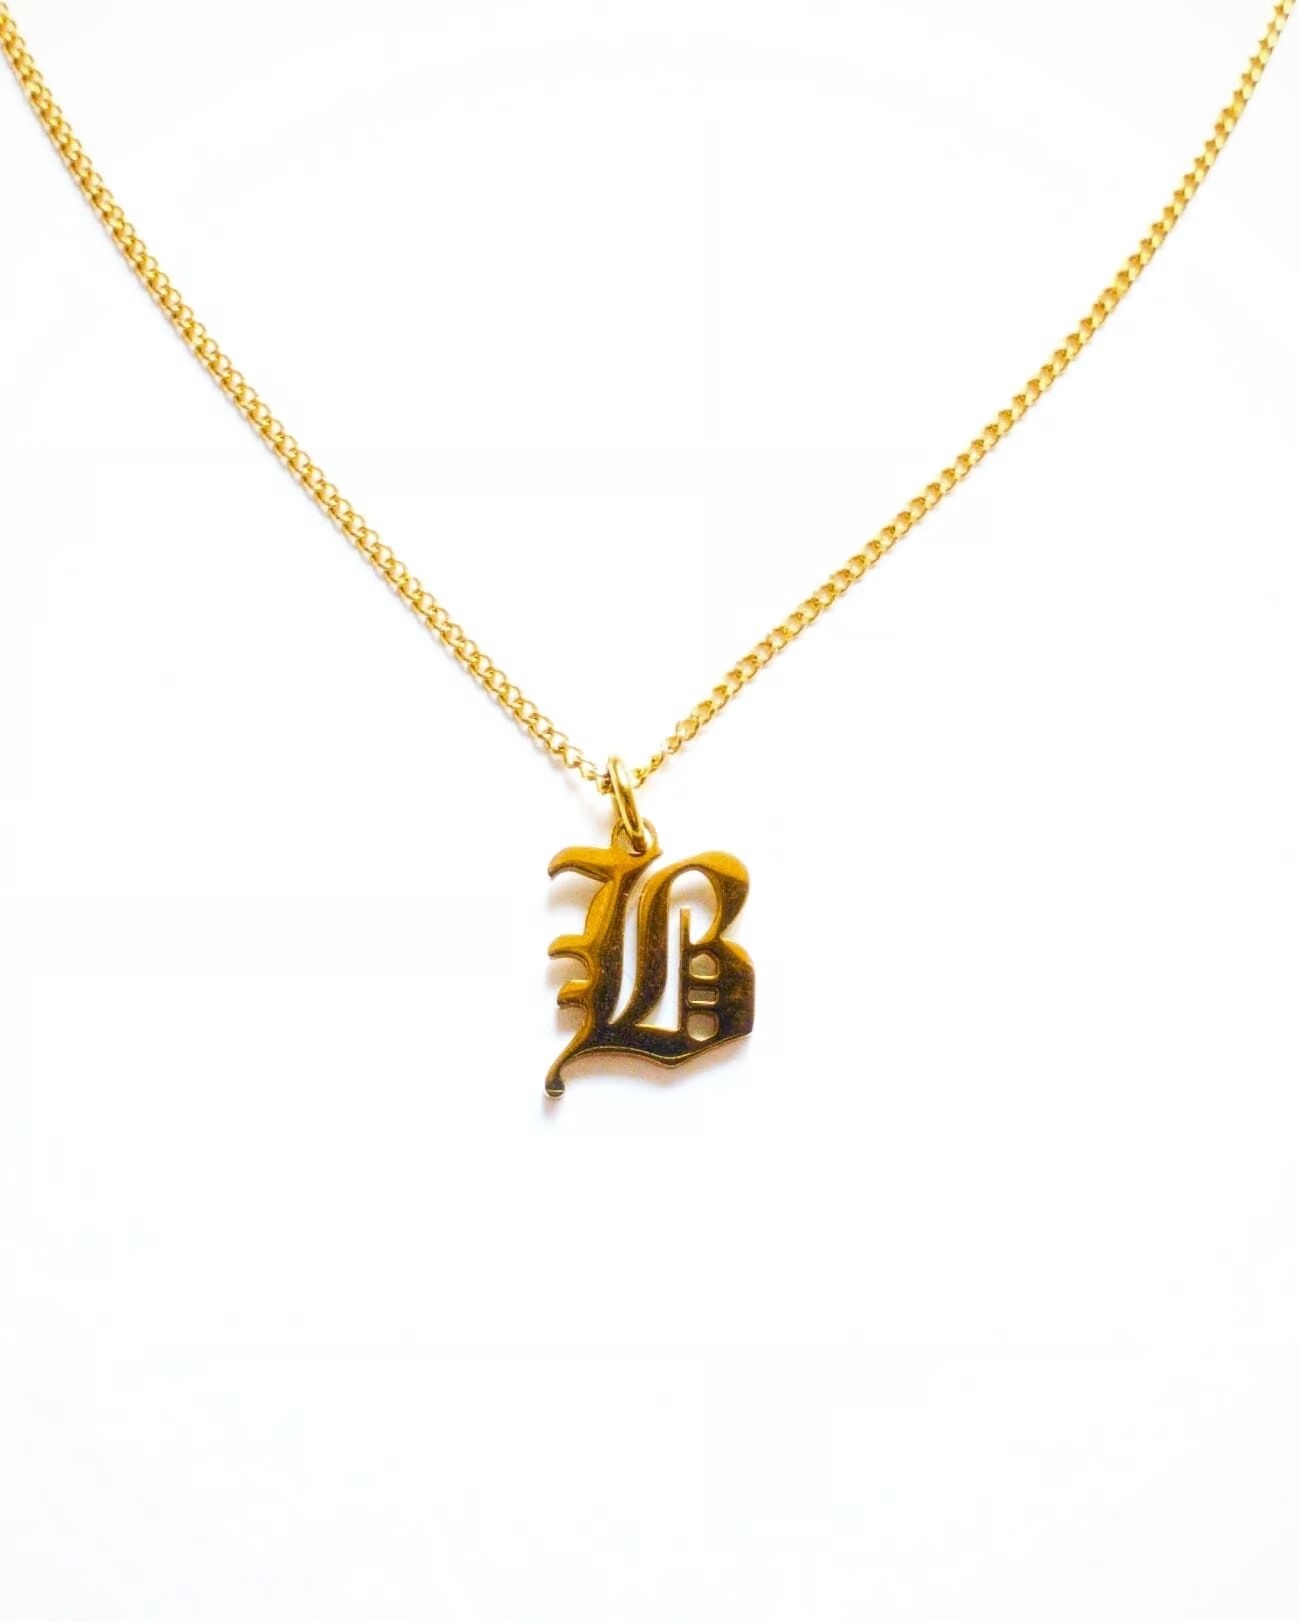 B NECKLACE - GOLD